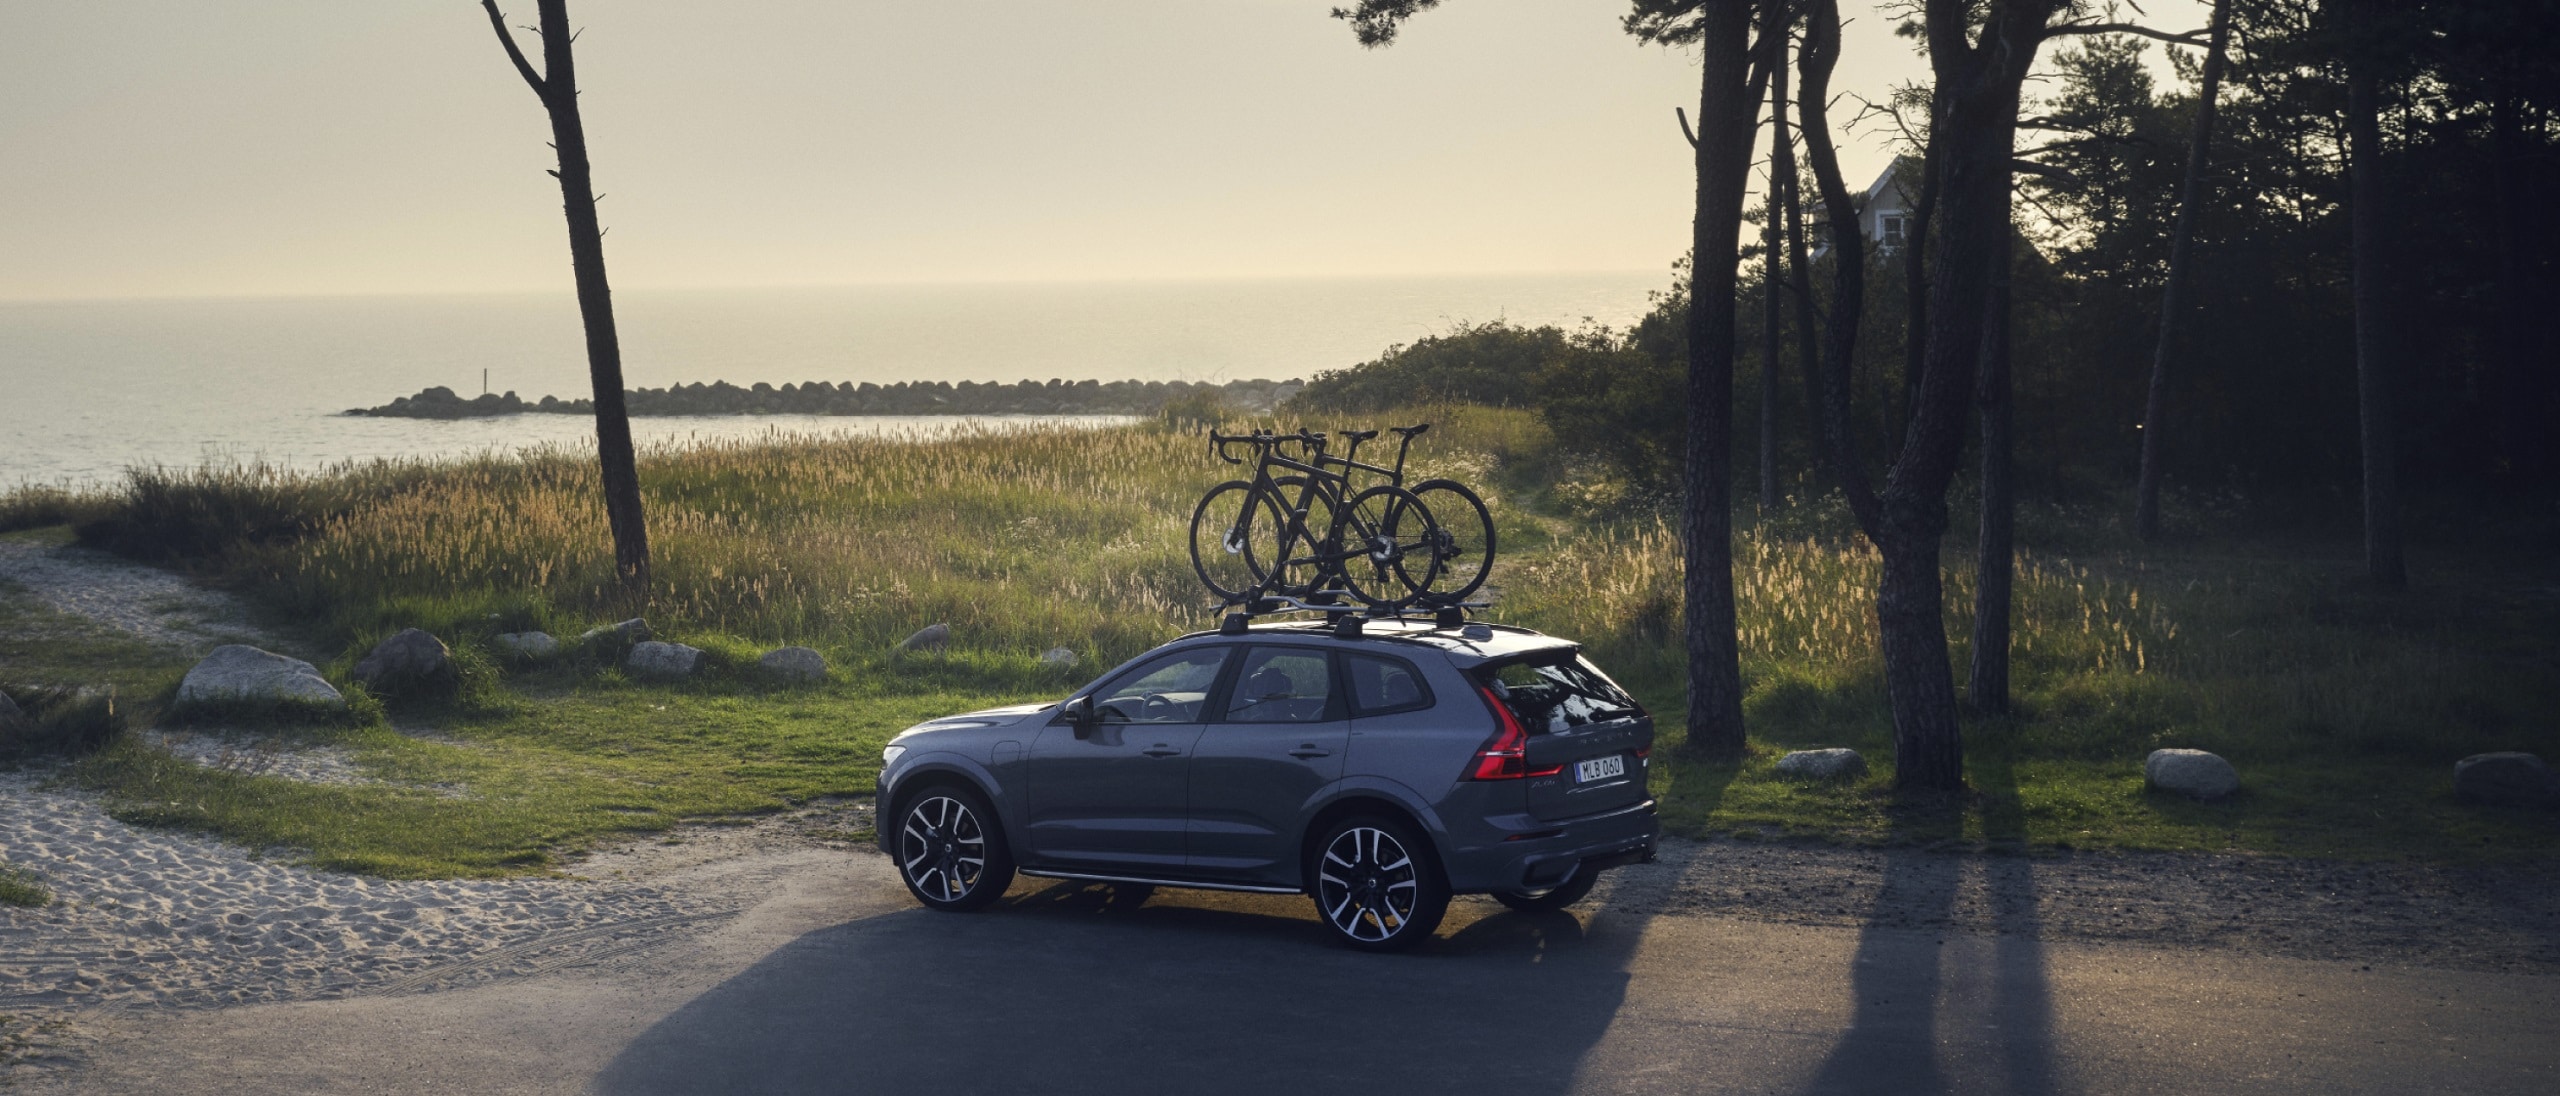 Volvo XC60 with a bicycle holder for load carrier.